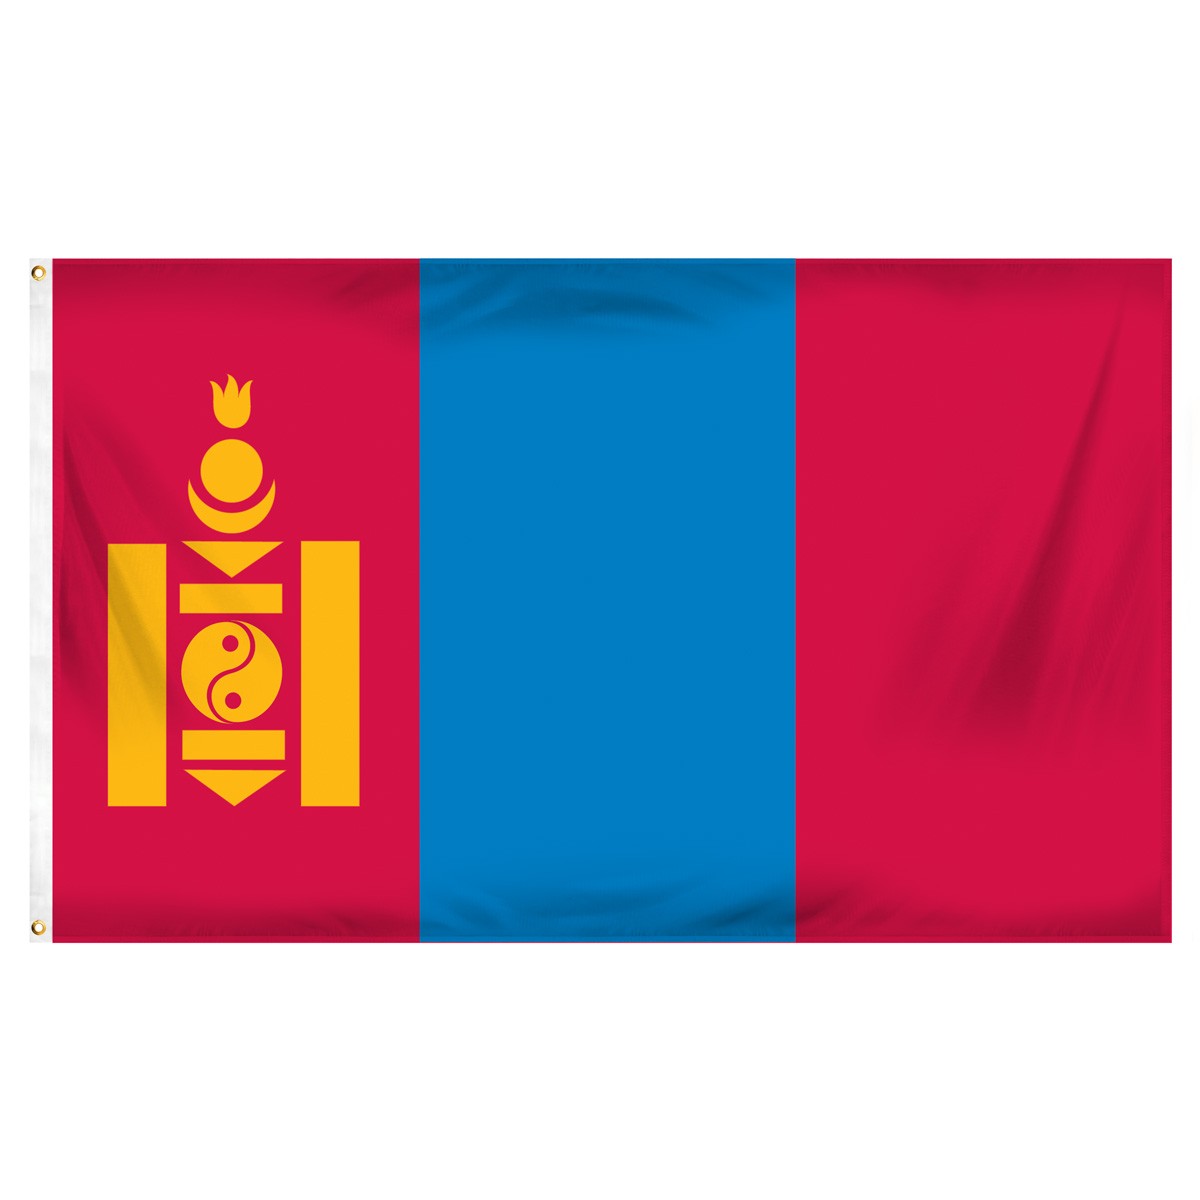 Mongolia Submit Flags and Flags